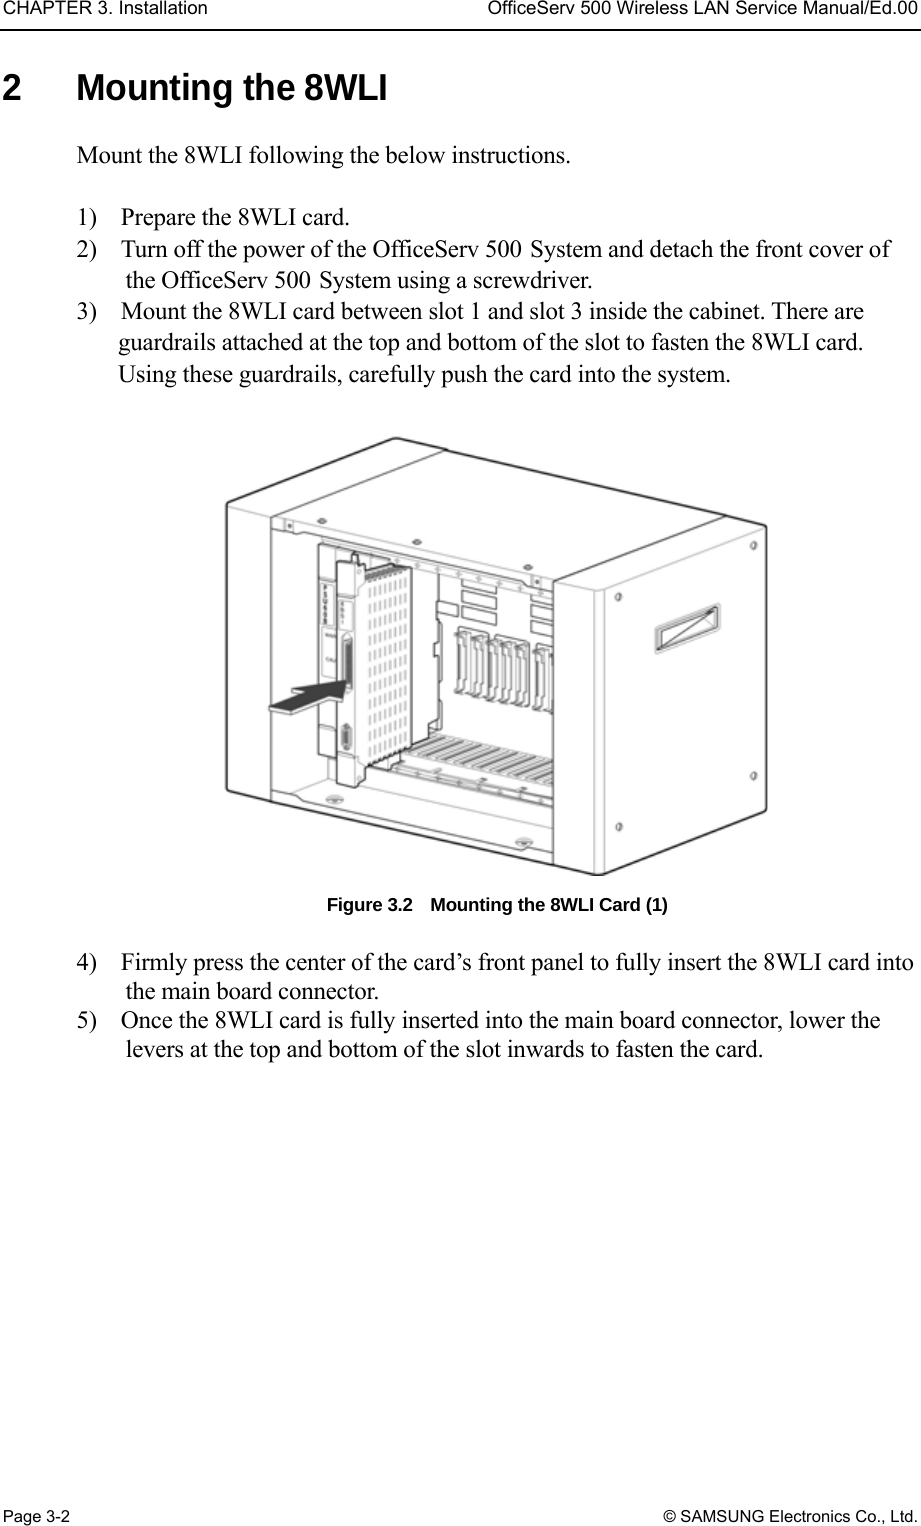 CHAPTER 3. Installation  OfficeServ 500 Wireless LAN Service Manual/Ed.00 Page 3-2 © SAMSUNG Electronics Co., Ltd. 2  Mounting the 8WLI Mount the 8WLI following the below instructions.  1)    Prepare the 8WLI card. 2)    Turn off the power of the OfficeServ 500 System and detach the front cover of the OfficeServ 500 System using a screwdriver. 3)    Mount the 8WLI card between slot 1 and slot 3 inside the cabinet. There are guardrails attached at the top and bottom of the slot to fasten the 8WLI card. Using these guardrails, carefully push the card into the system.  Figure 3.2    Mounting the 8WLI Card (1)    4)    Firmly press the center of the card’s front panel to fully insert the 8WLI card into the main board connector. 5)    Once the 8WLI card is fully inserted into the main board connector, lower the levers at the top and bottom of the slot inwards to fasten the card.  